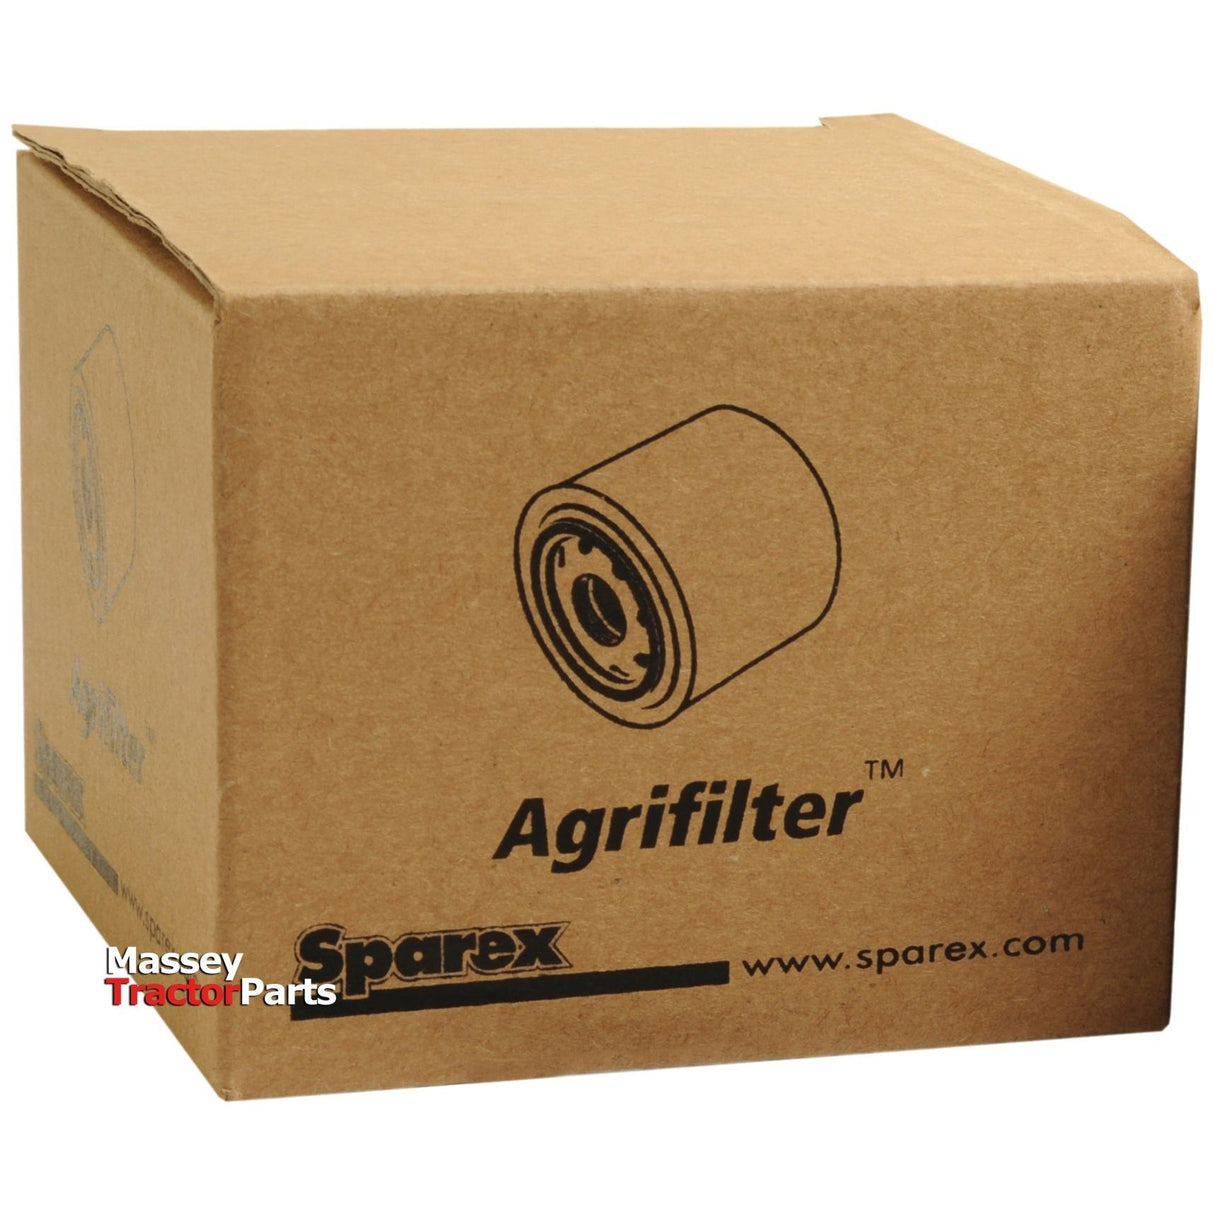 Oil Filter - Spin On -
 - S.109658 - Farming Parts